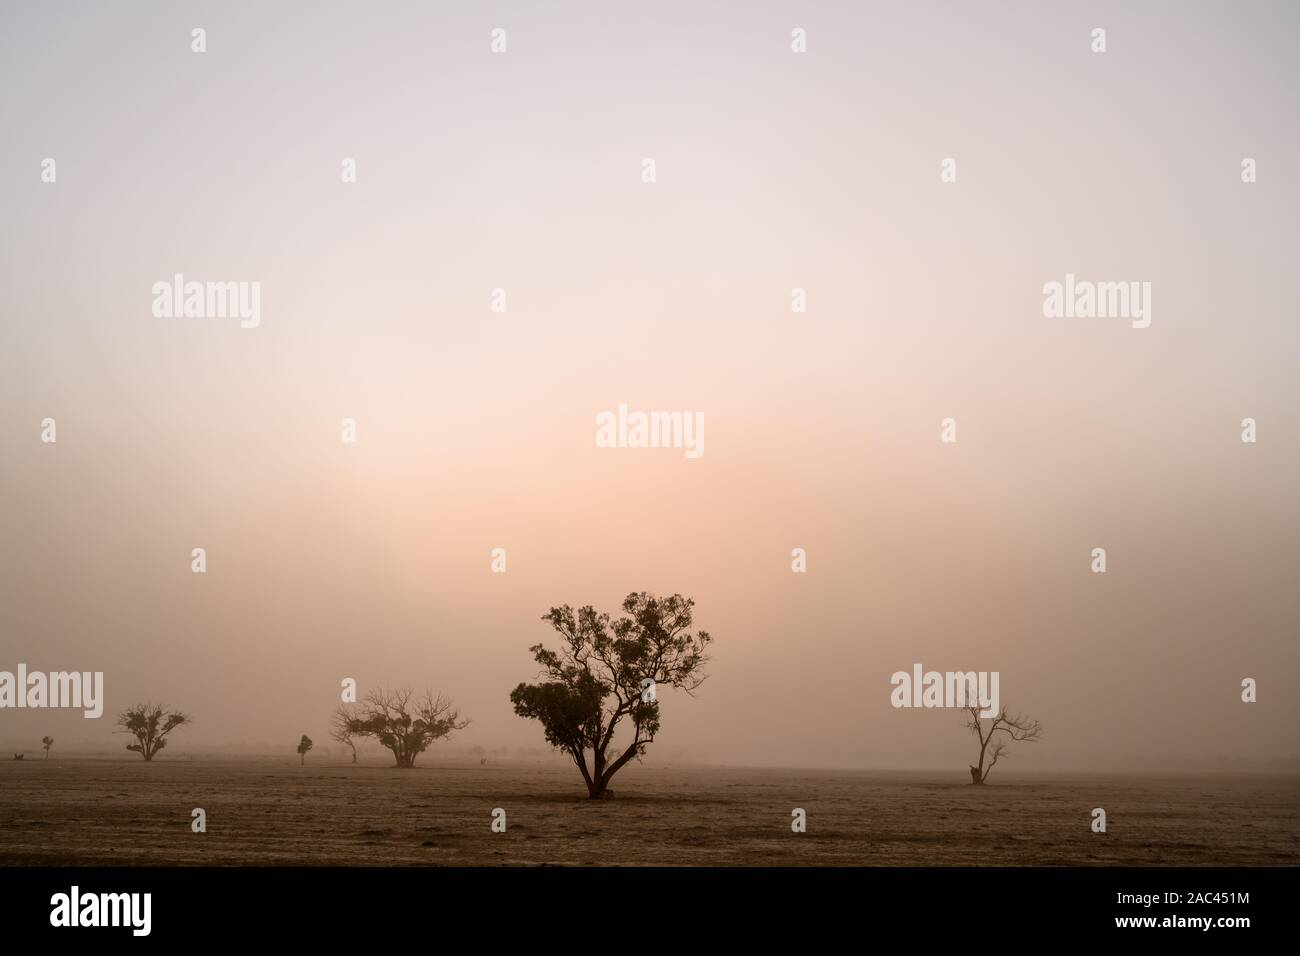 Days of high wind across south eastern Australia lead to long periods of dust filled atmosphere. Stock Photo